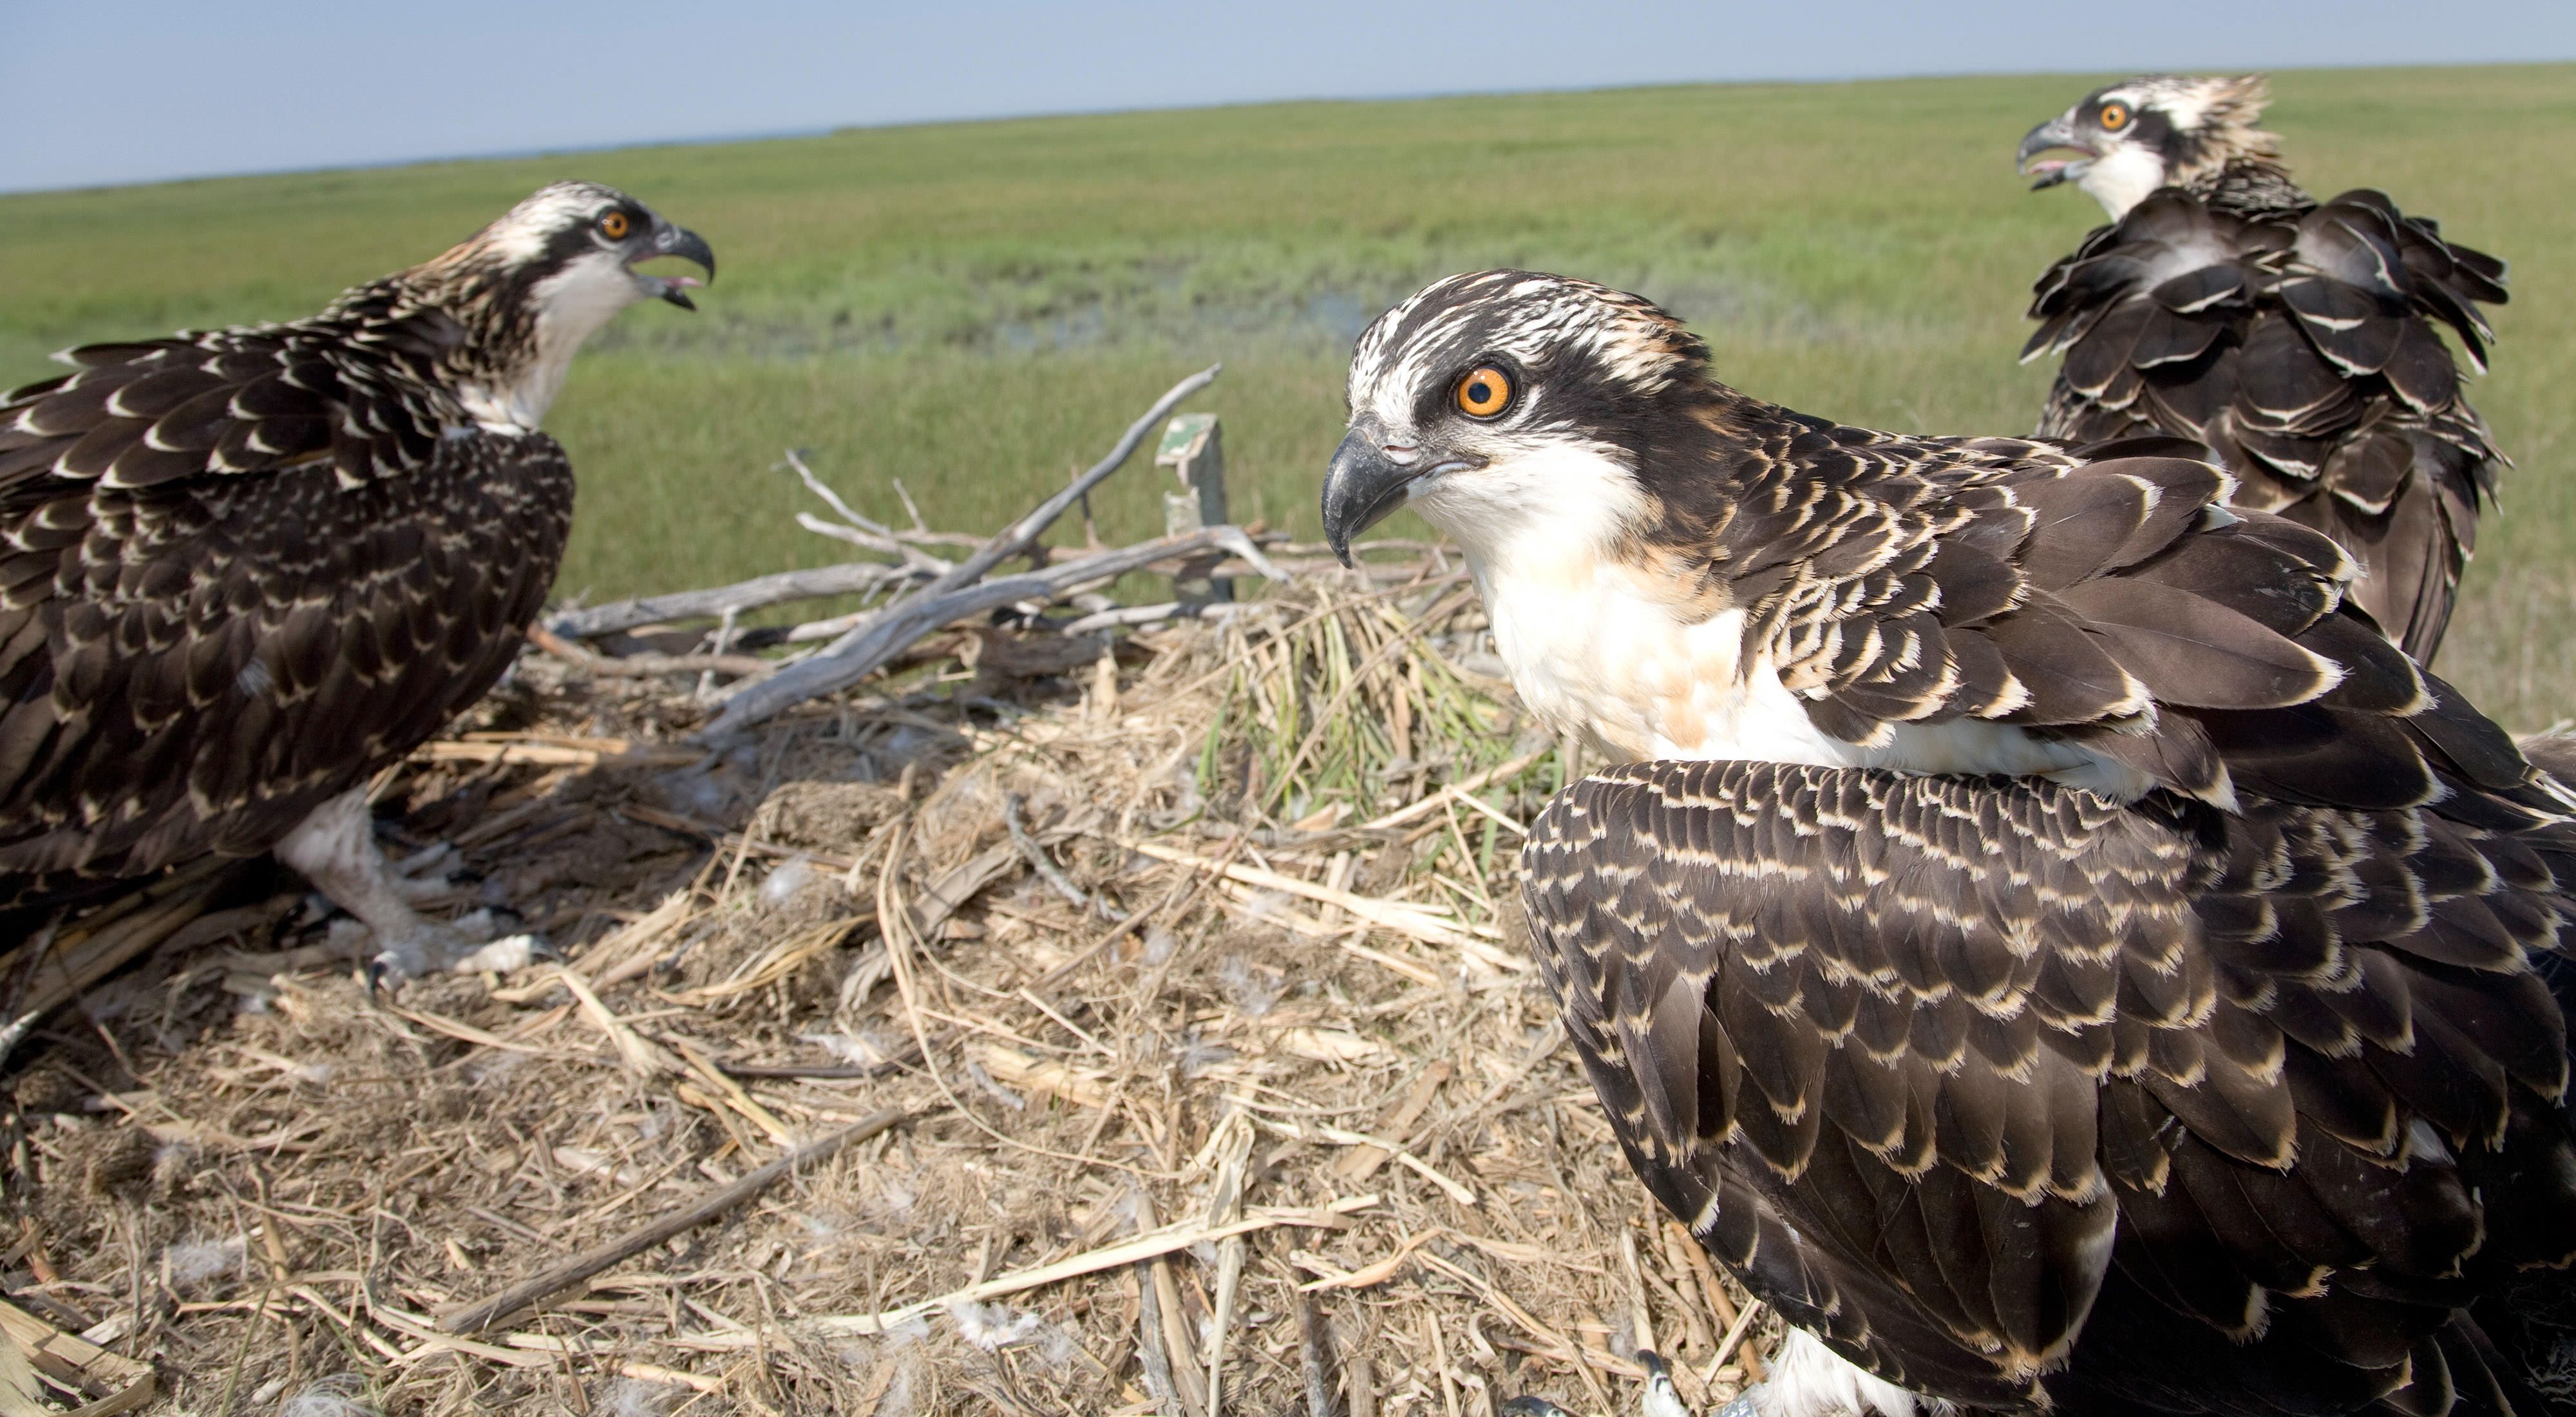 A closeup of two osprey in a nest.